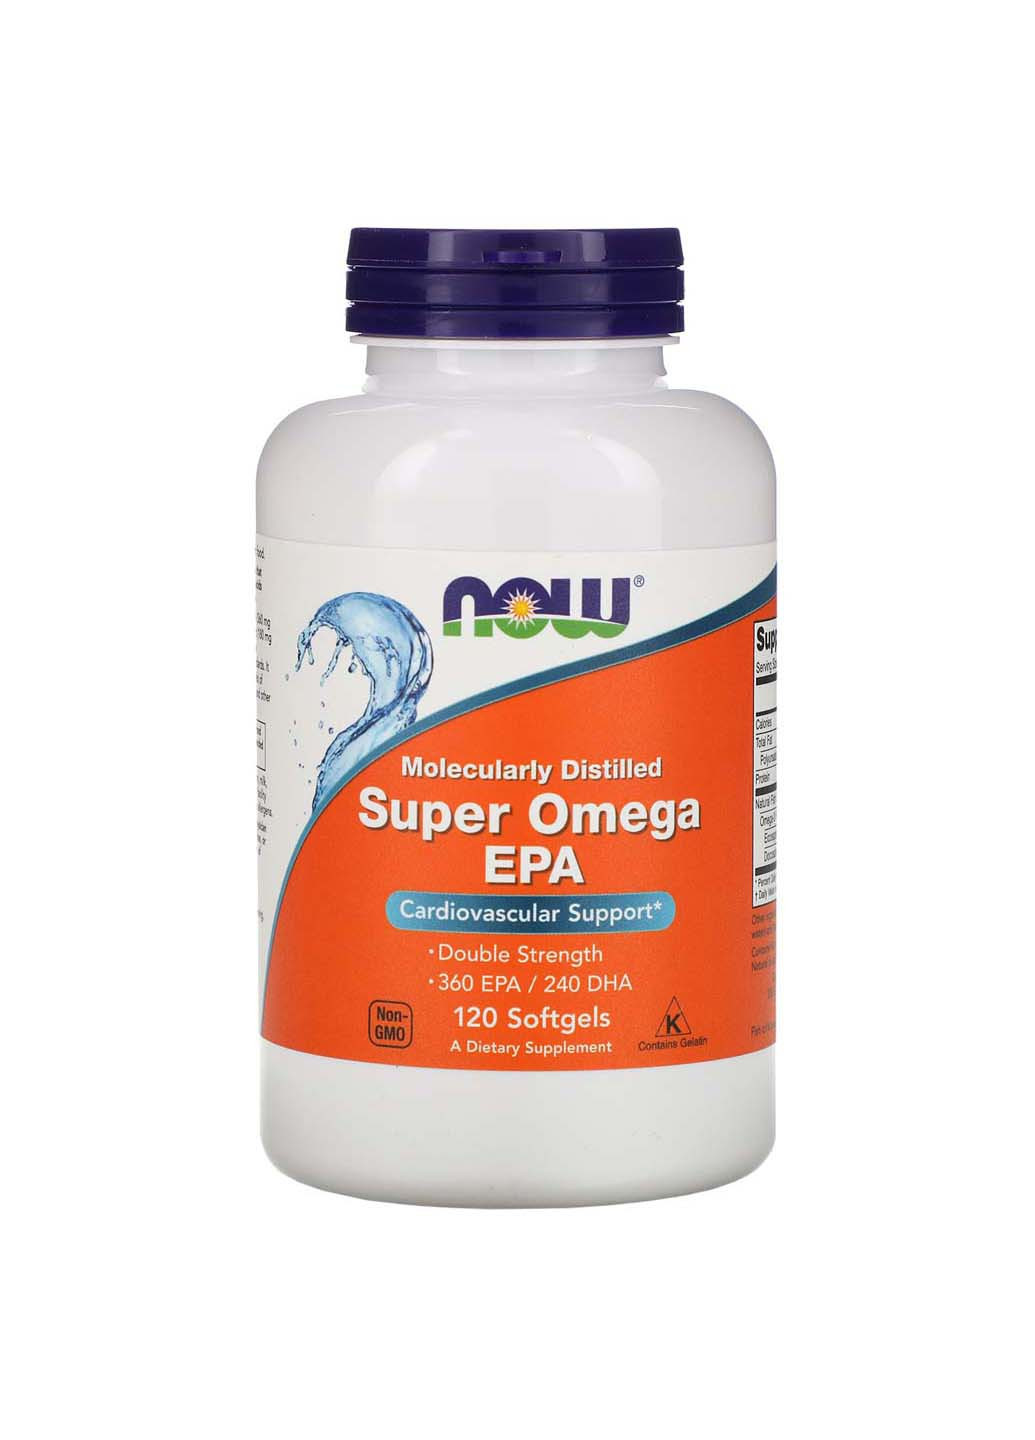 Super Omega EPA 360 ЕПК/240 ДГК 120 гелевих капсул Now Foods (256931329)